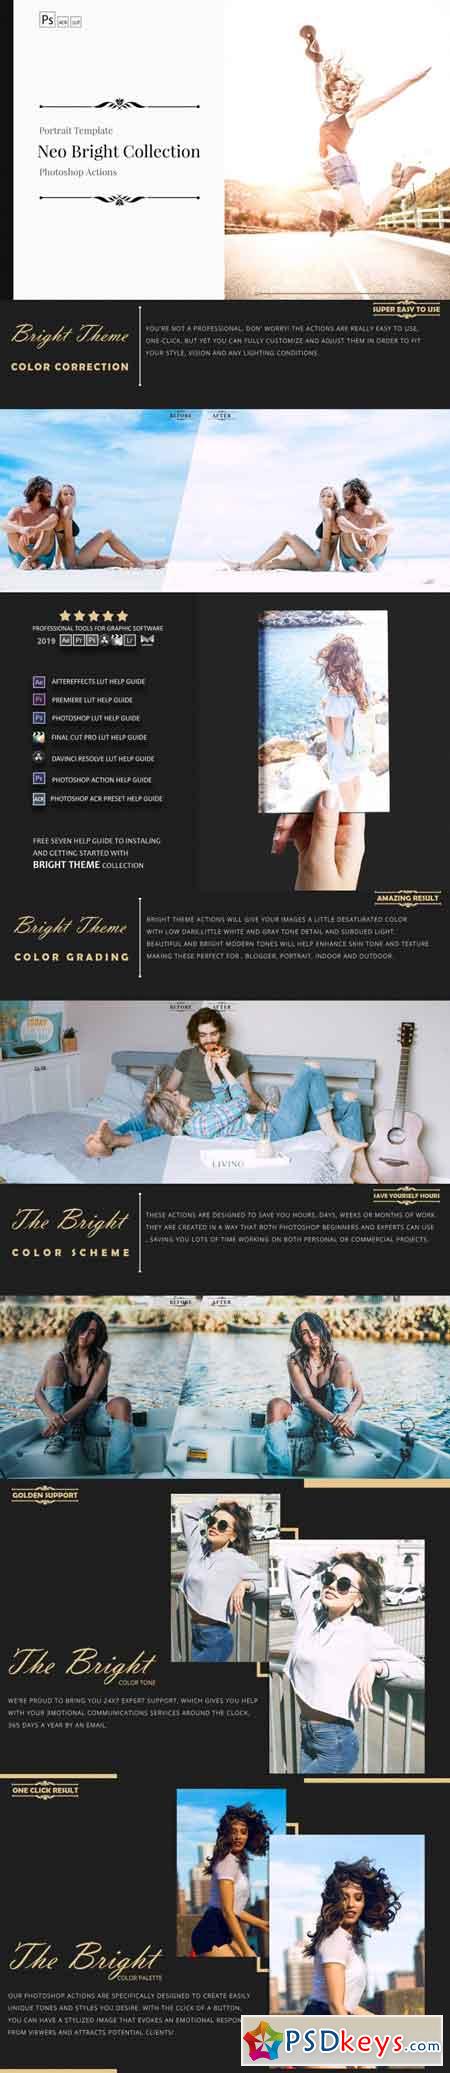 Neo Bright Color Grading photoshop actions,ACR and LUT Preset 3521494